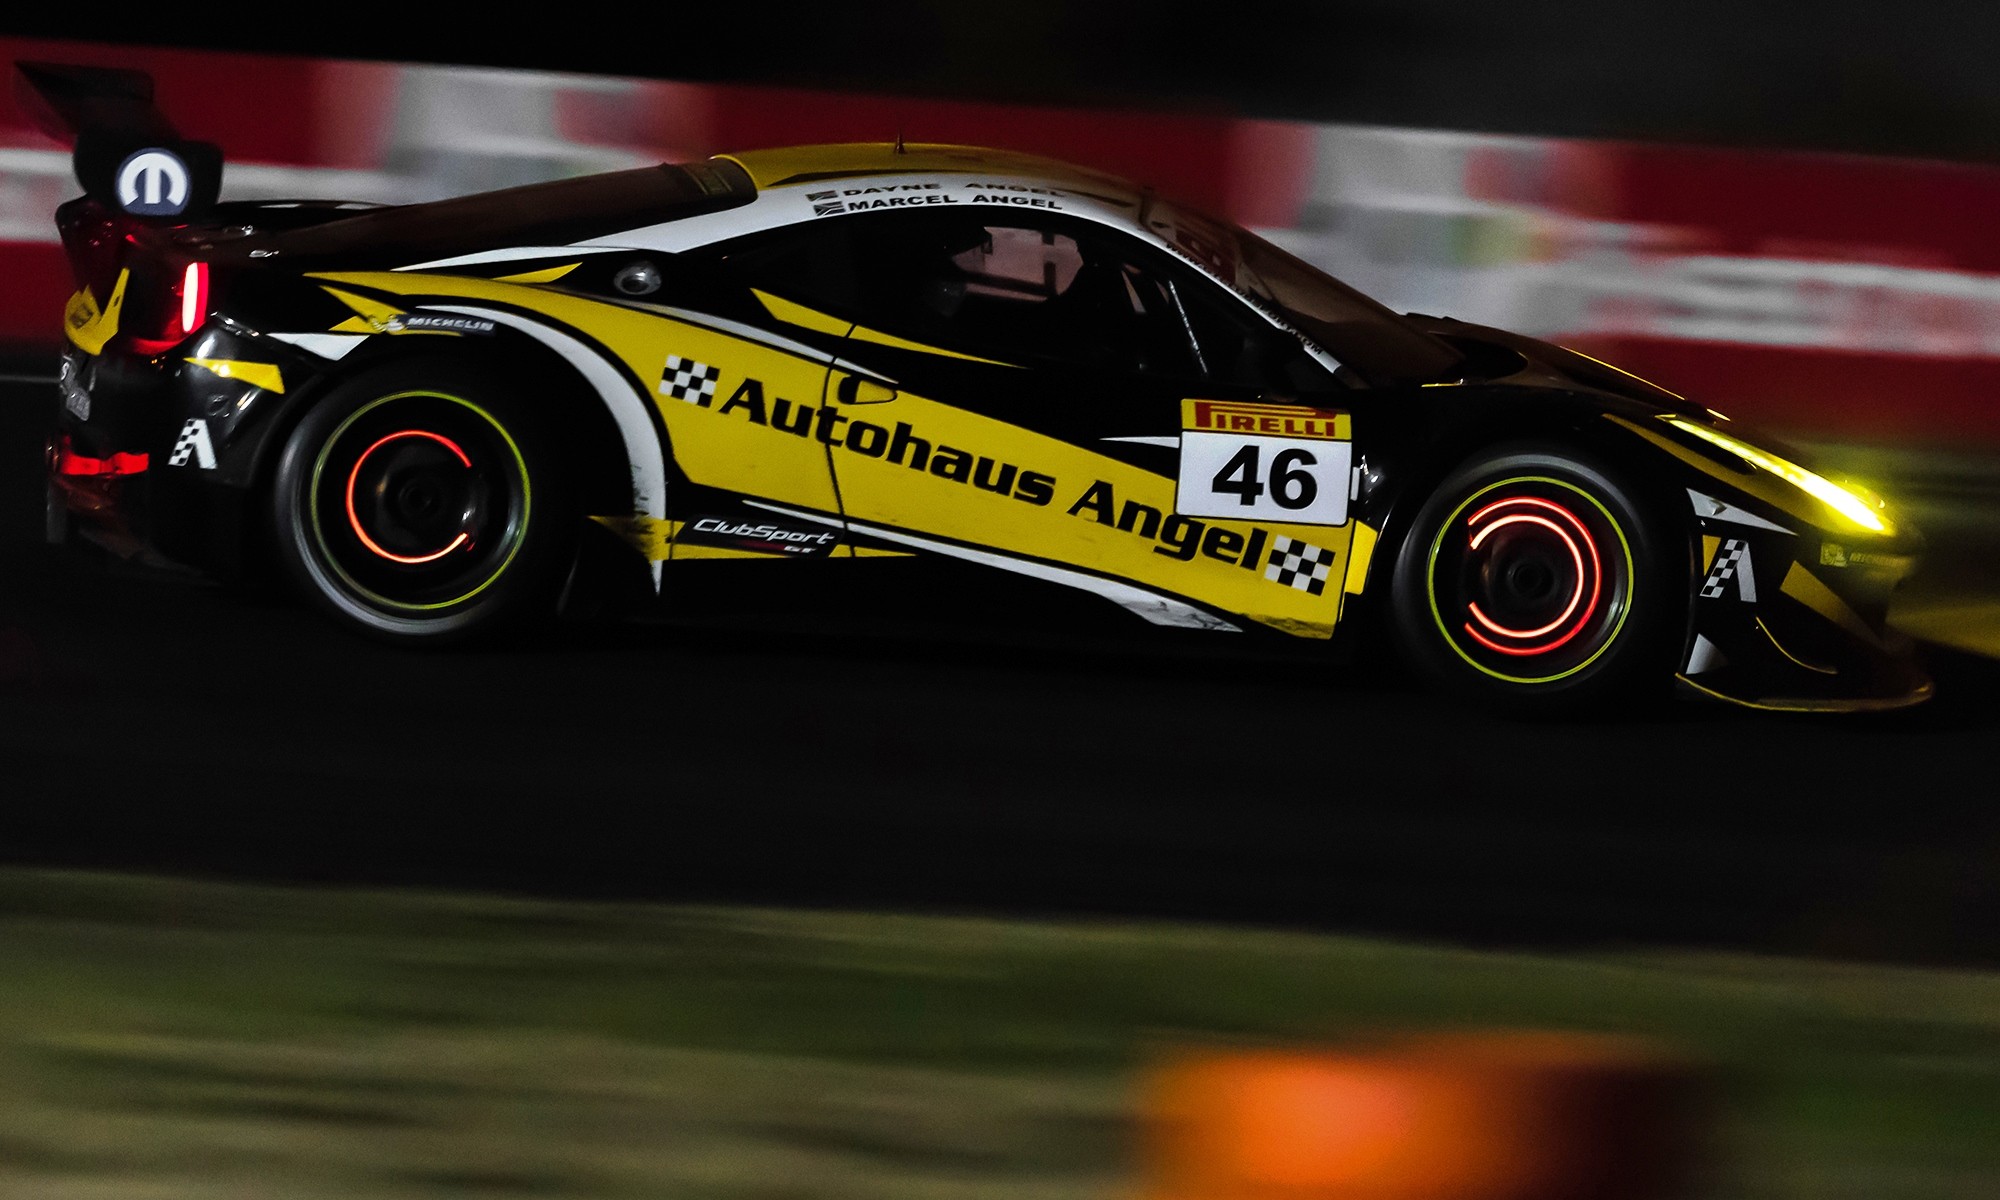 Racing into darkness creates great, unique images such as these glowing brake discs of the Ferrari 458 GT3.